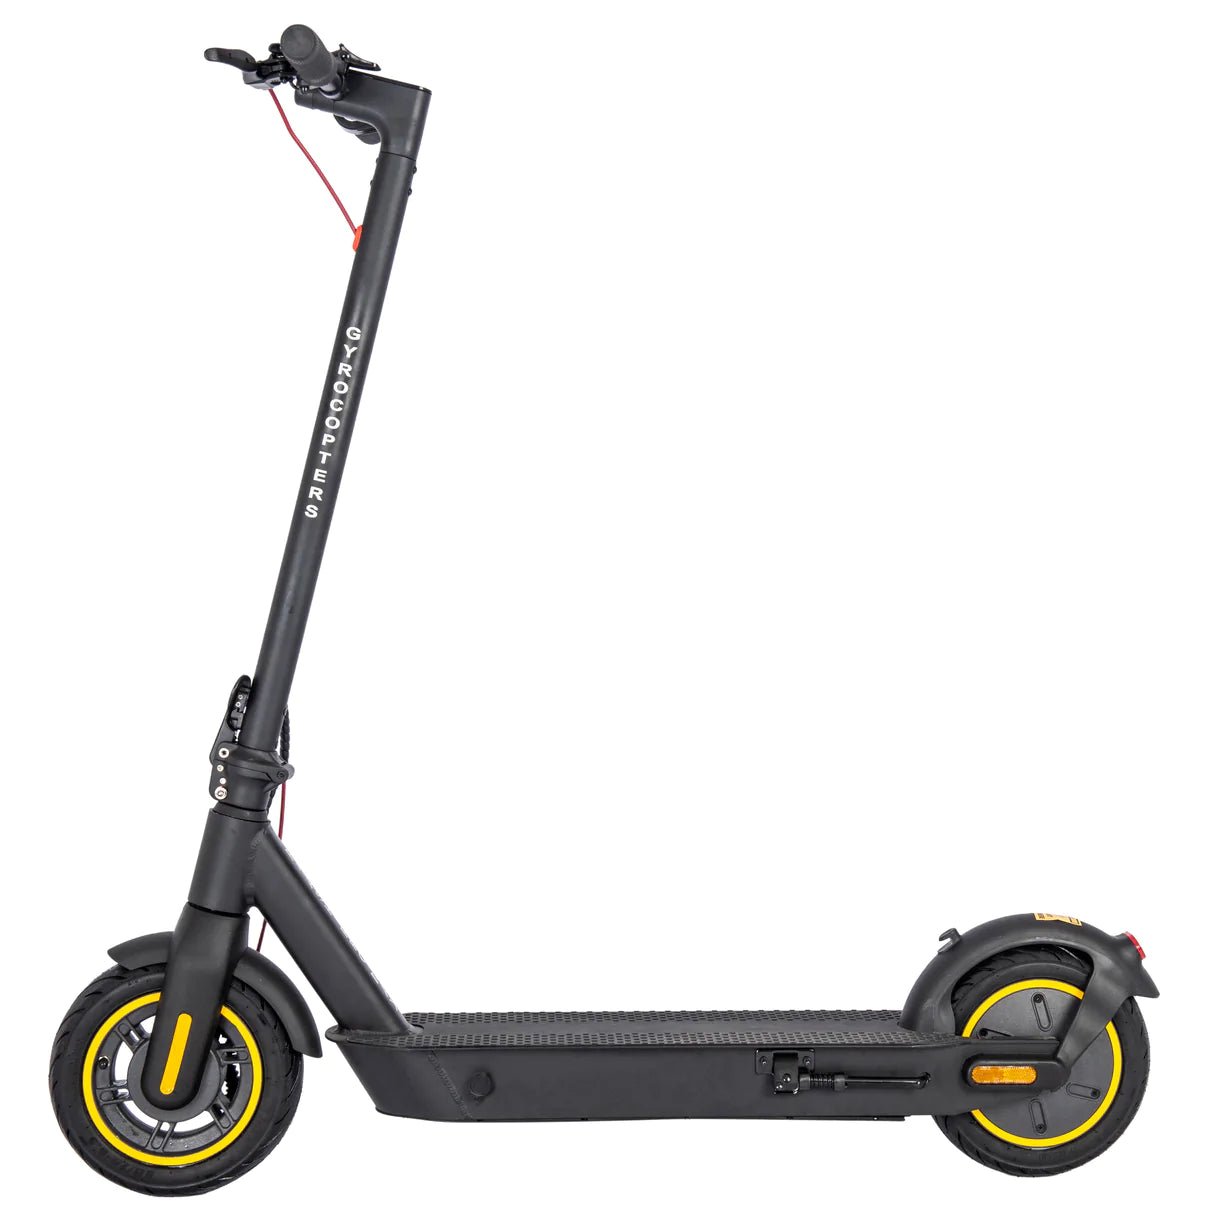 Guide to choosing the appropriate Electric Scooter